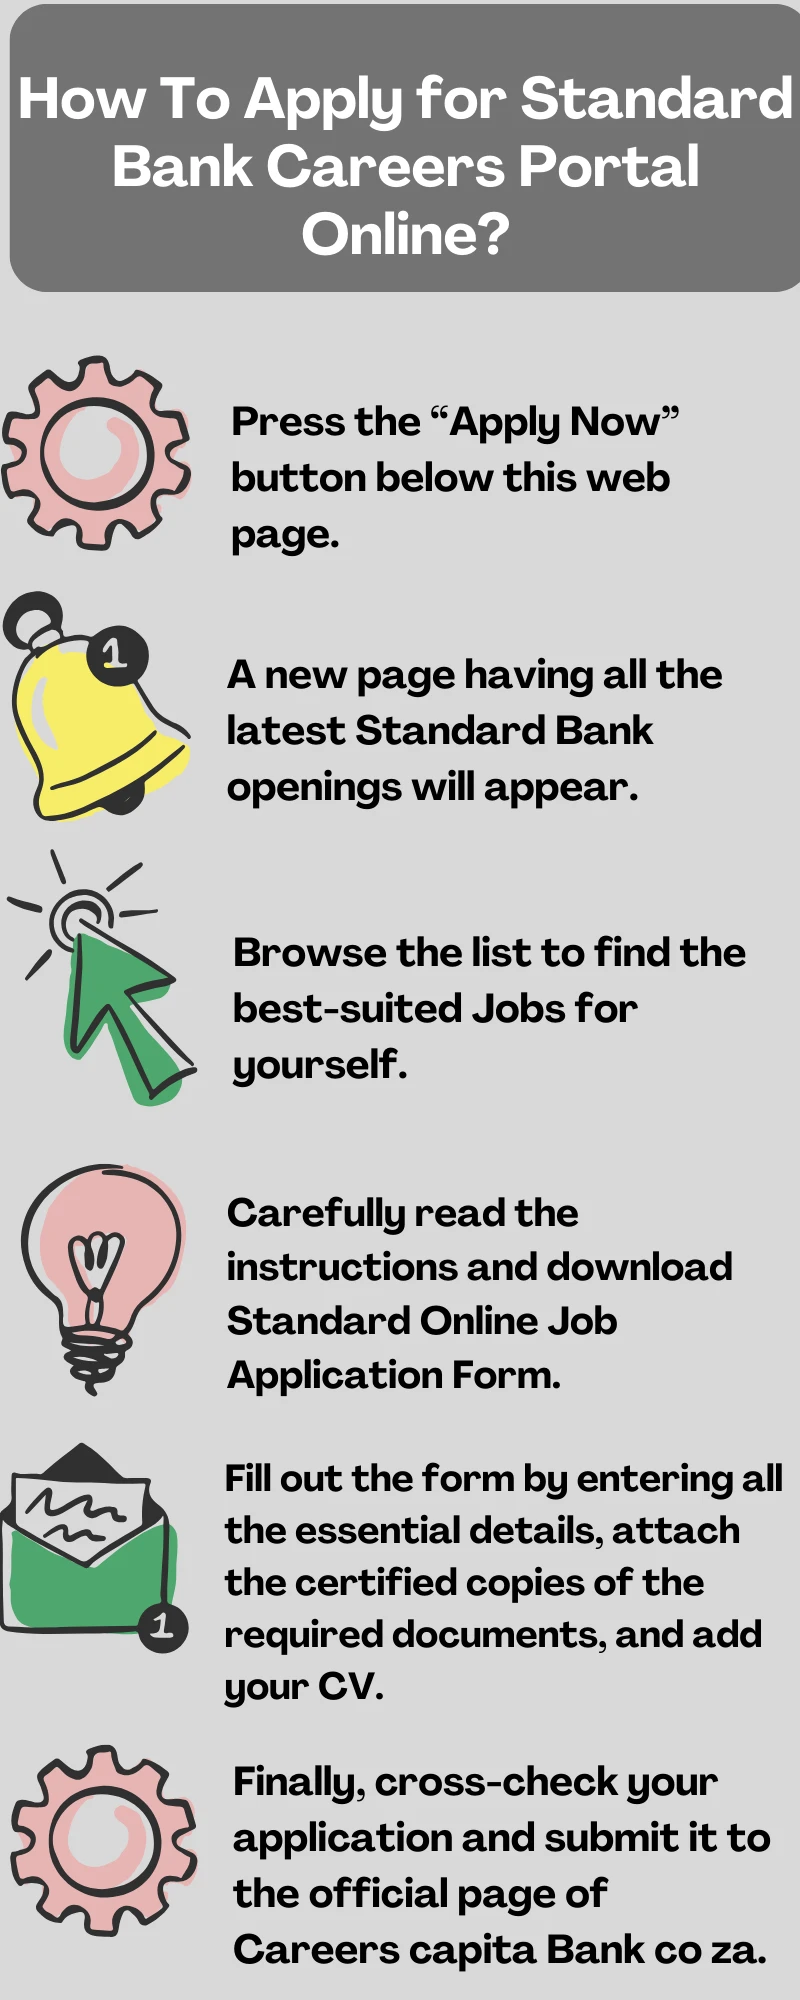 How To Apply for Standard Bank Careers Portal Online?